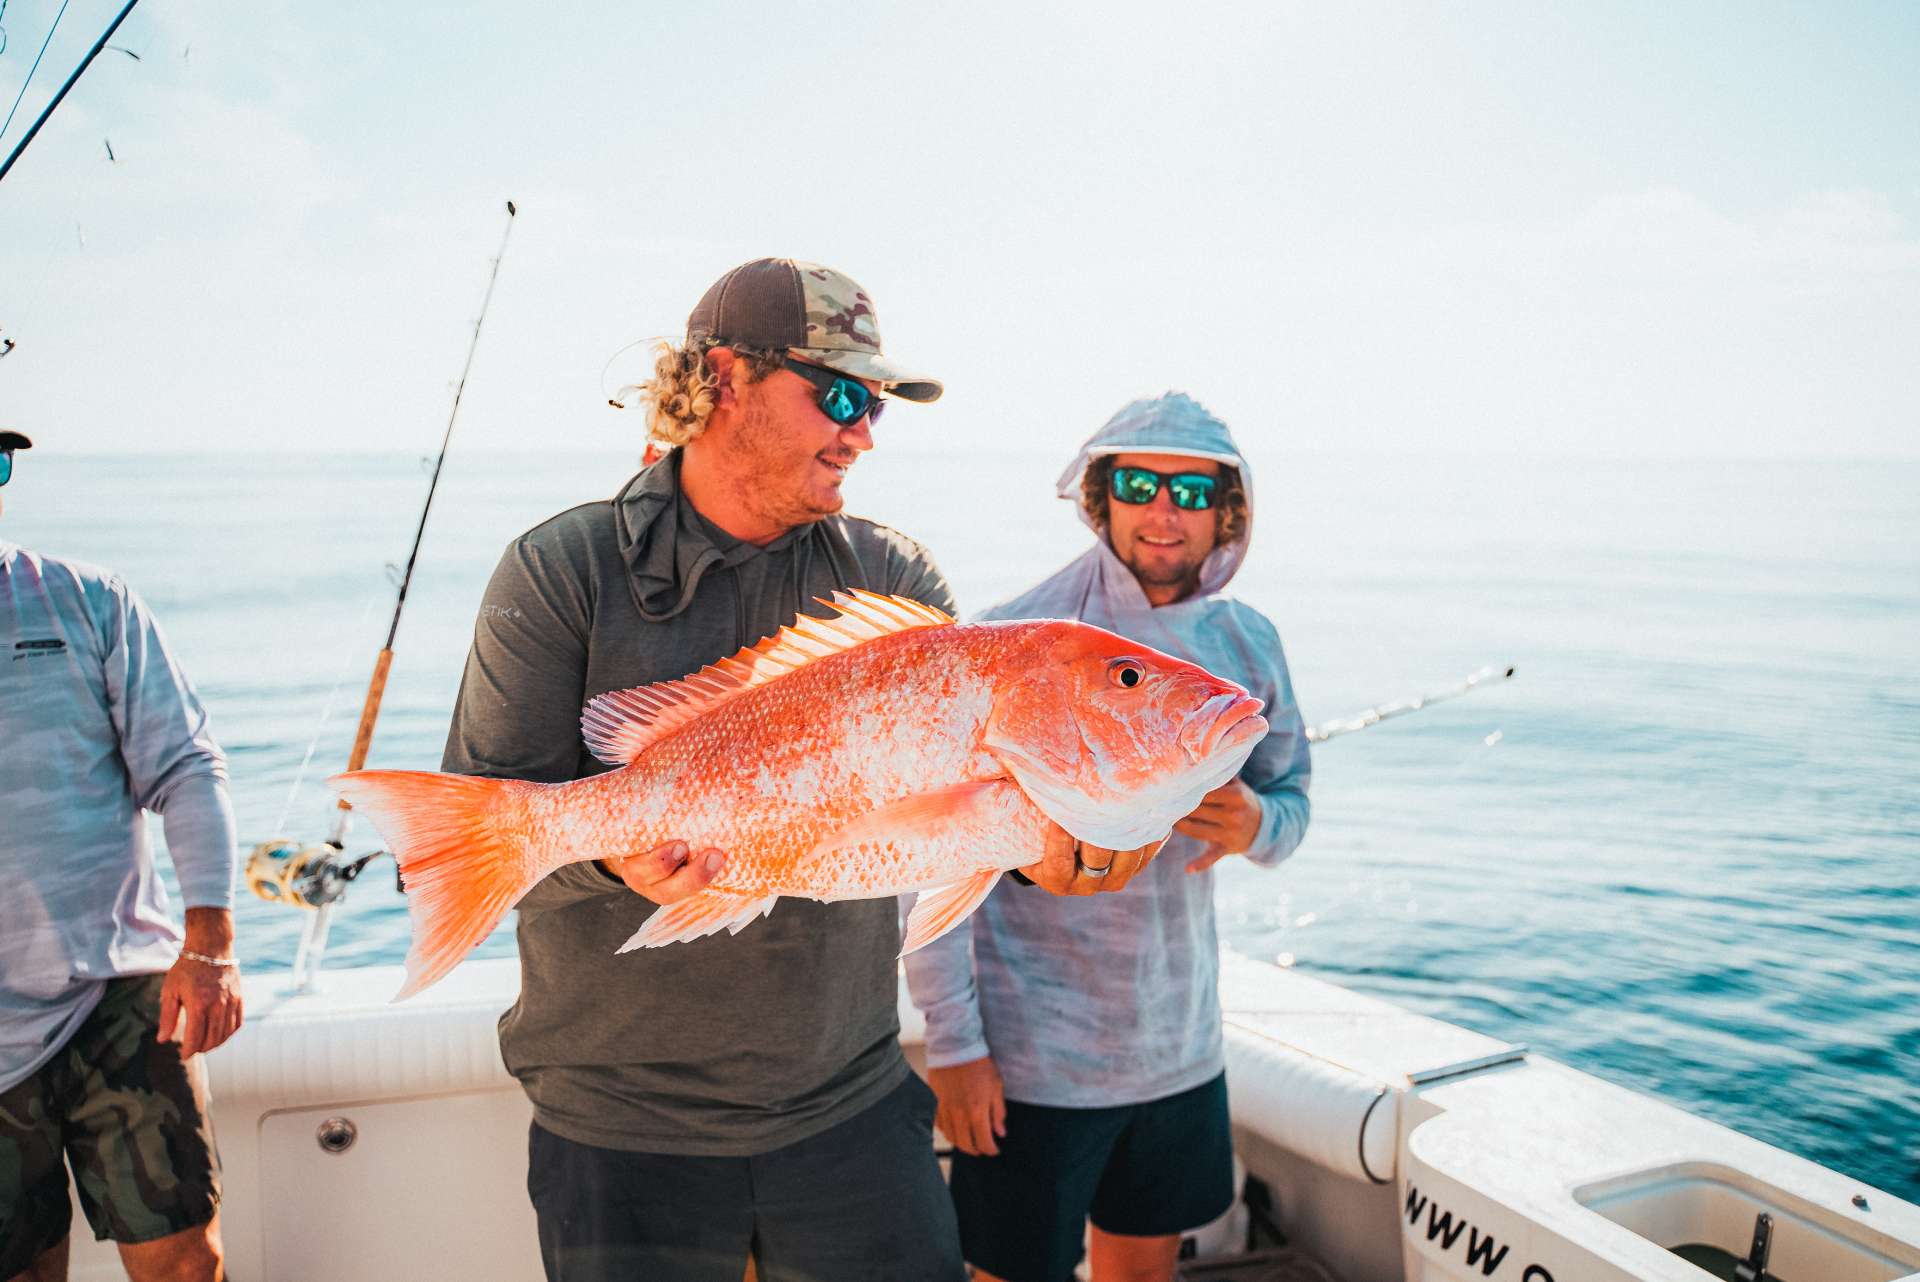 Types of fish to expect on inshore fishing